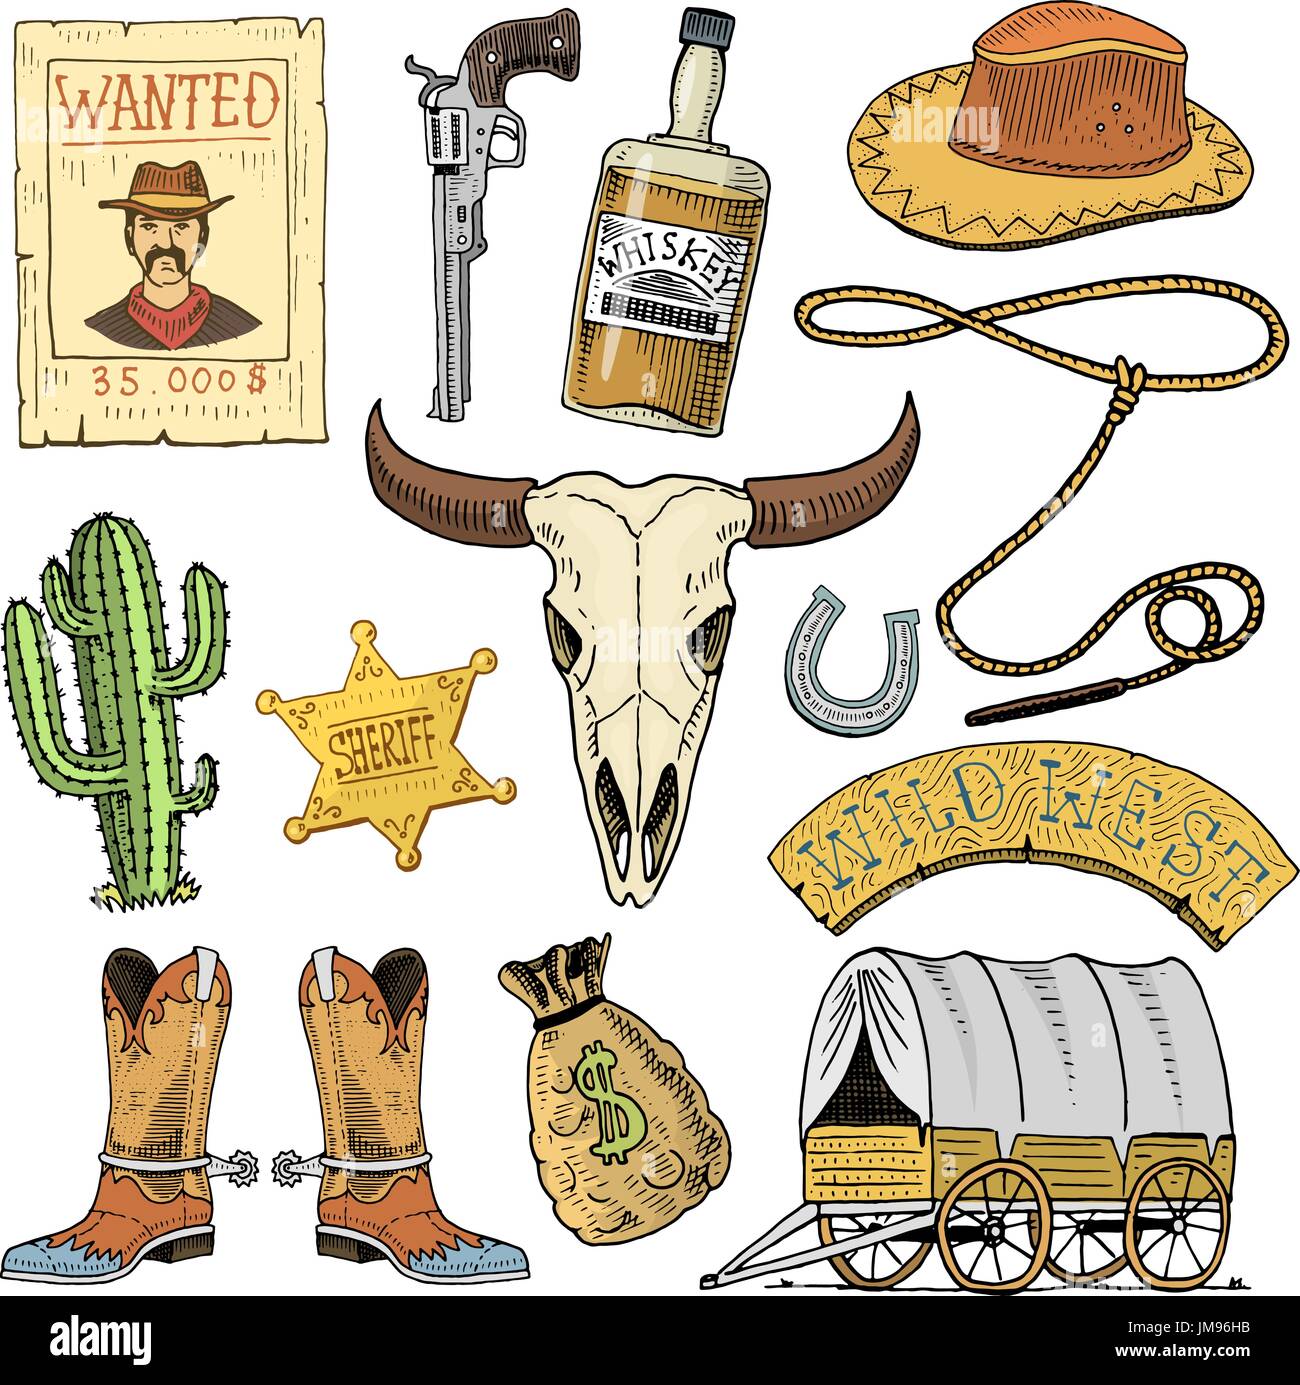 Wild west, rodeo show, cowboy or indians with lasso. hat and gun, cactus with sheriff star and bison, boot with horseshoe and wanted poster. engraved hand drawn in old sketch or and vintage style. Stock Vector